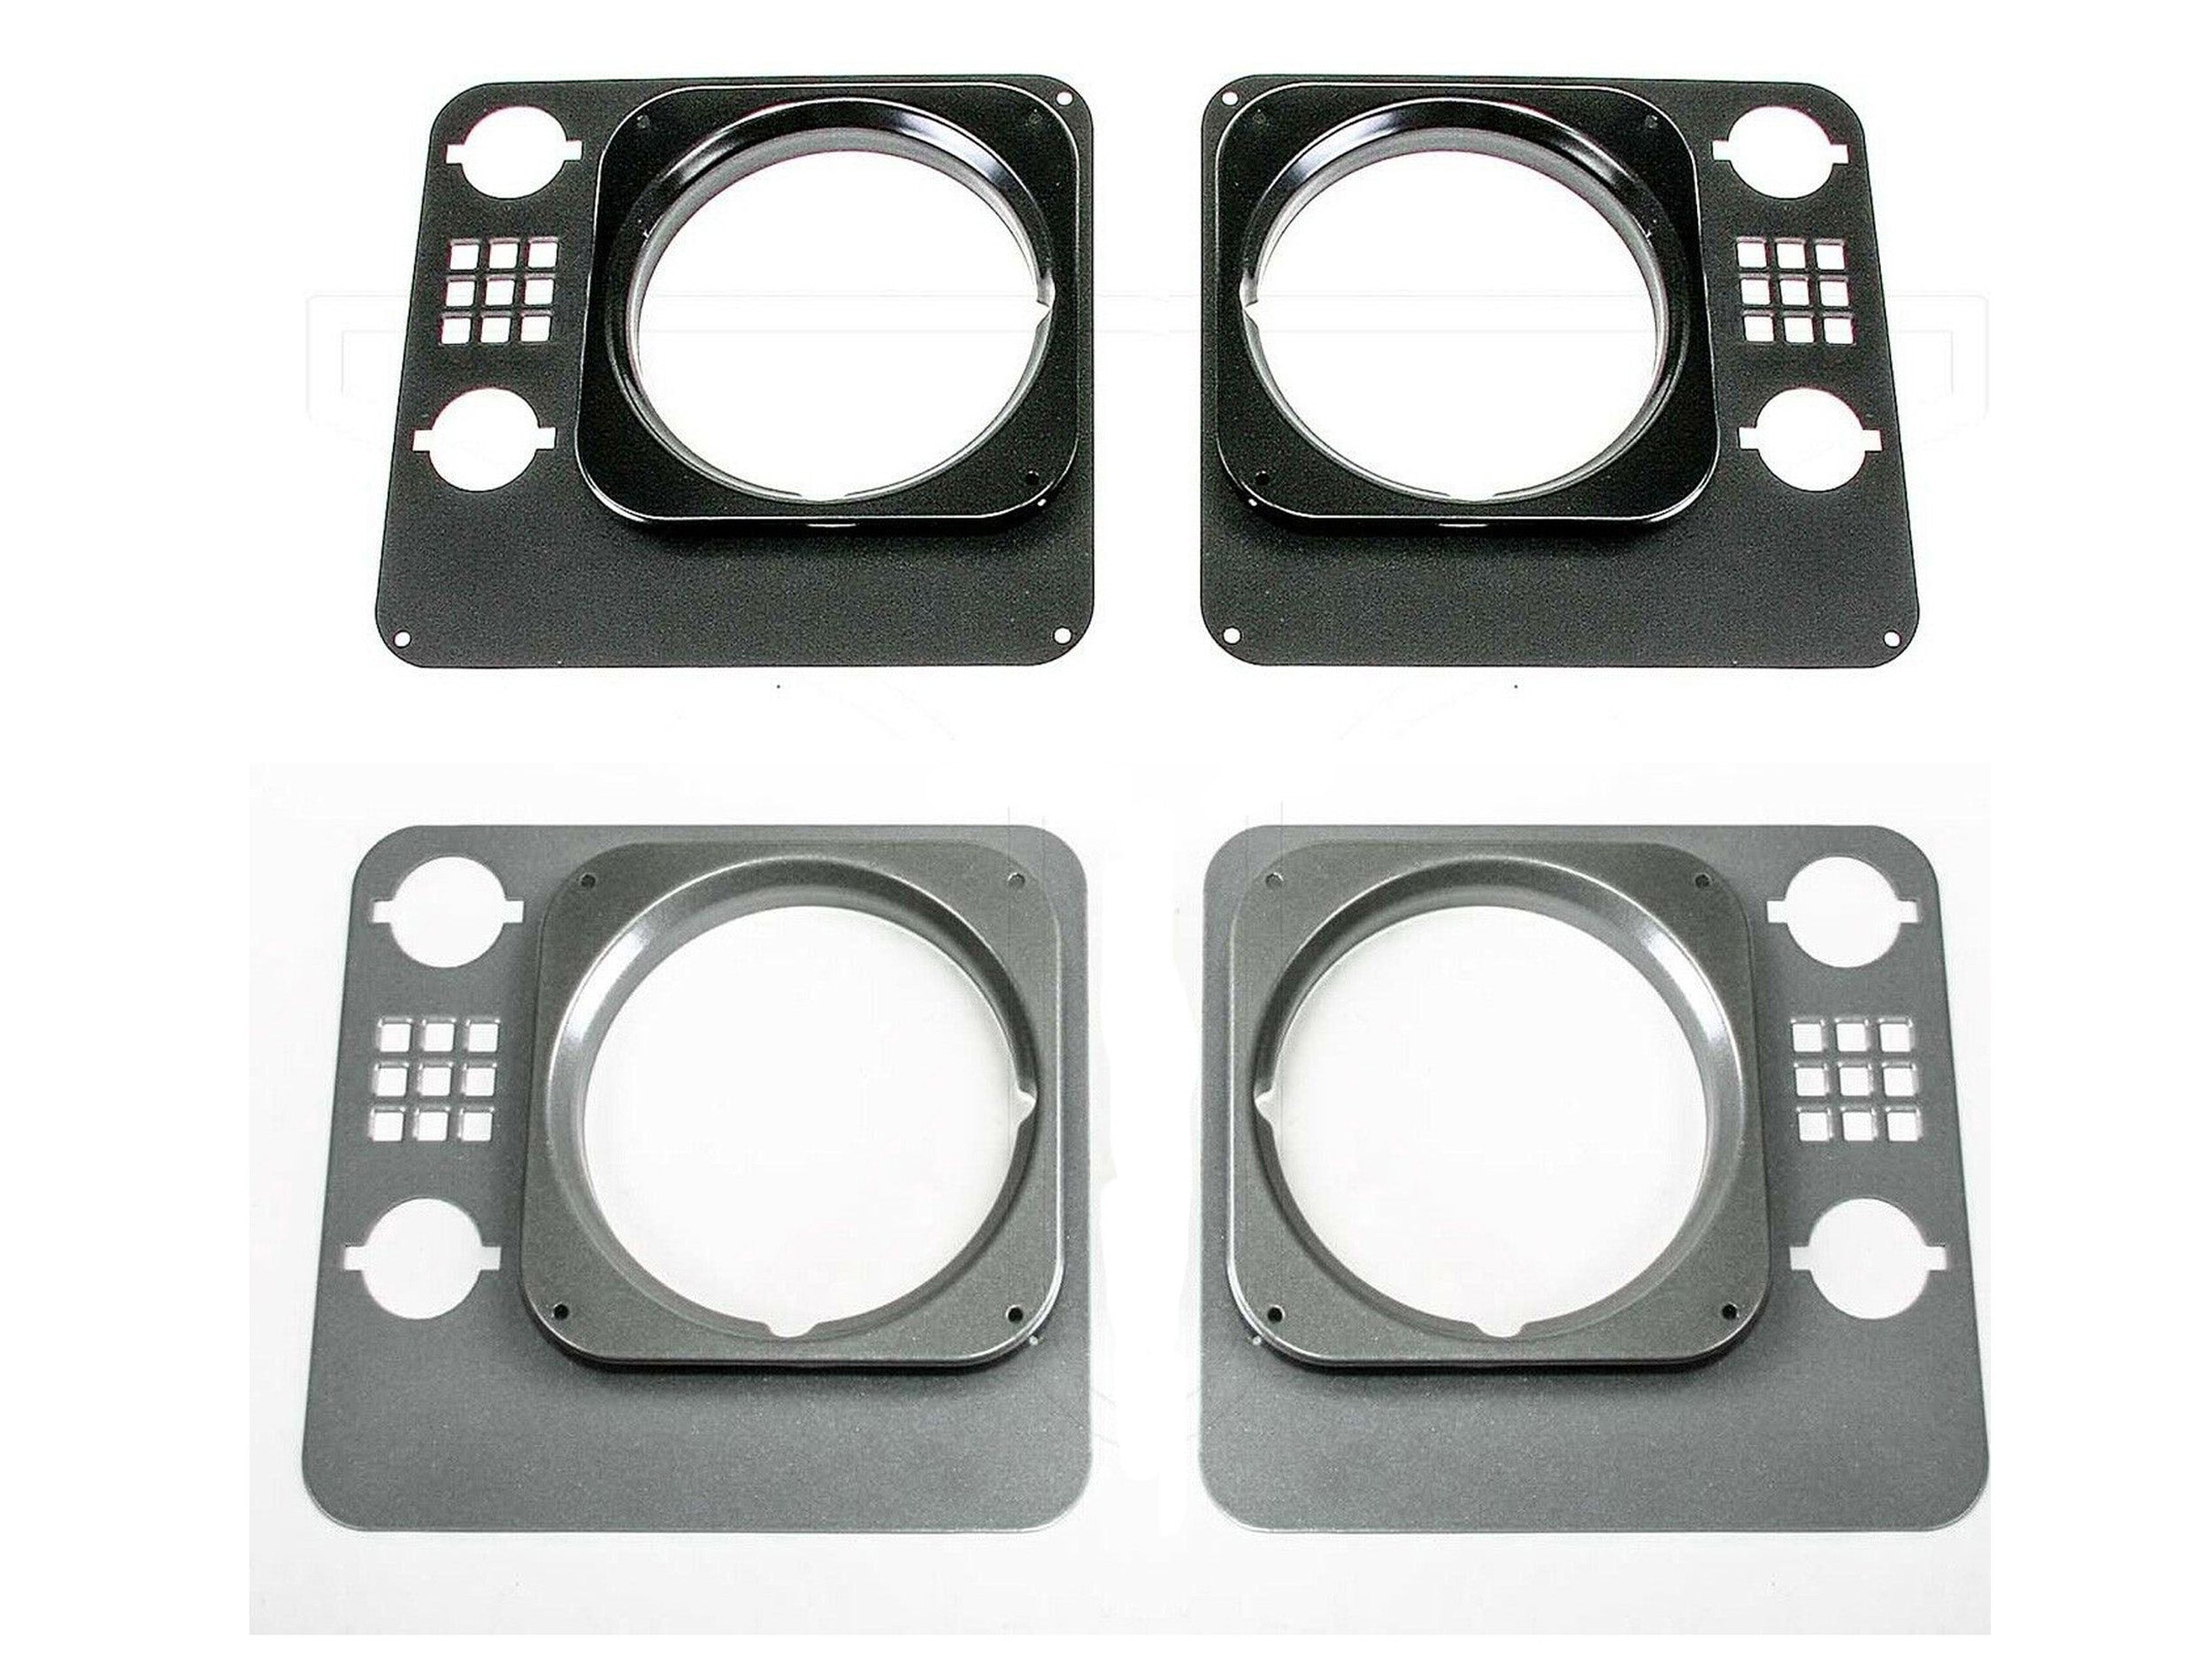 Heritage Headlight Surrounds - Land Rover Defender with inlet squares (stamped aluminum, set of 2)